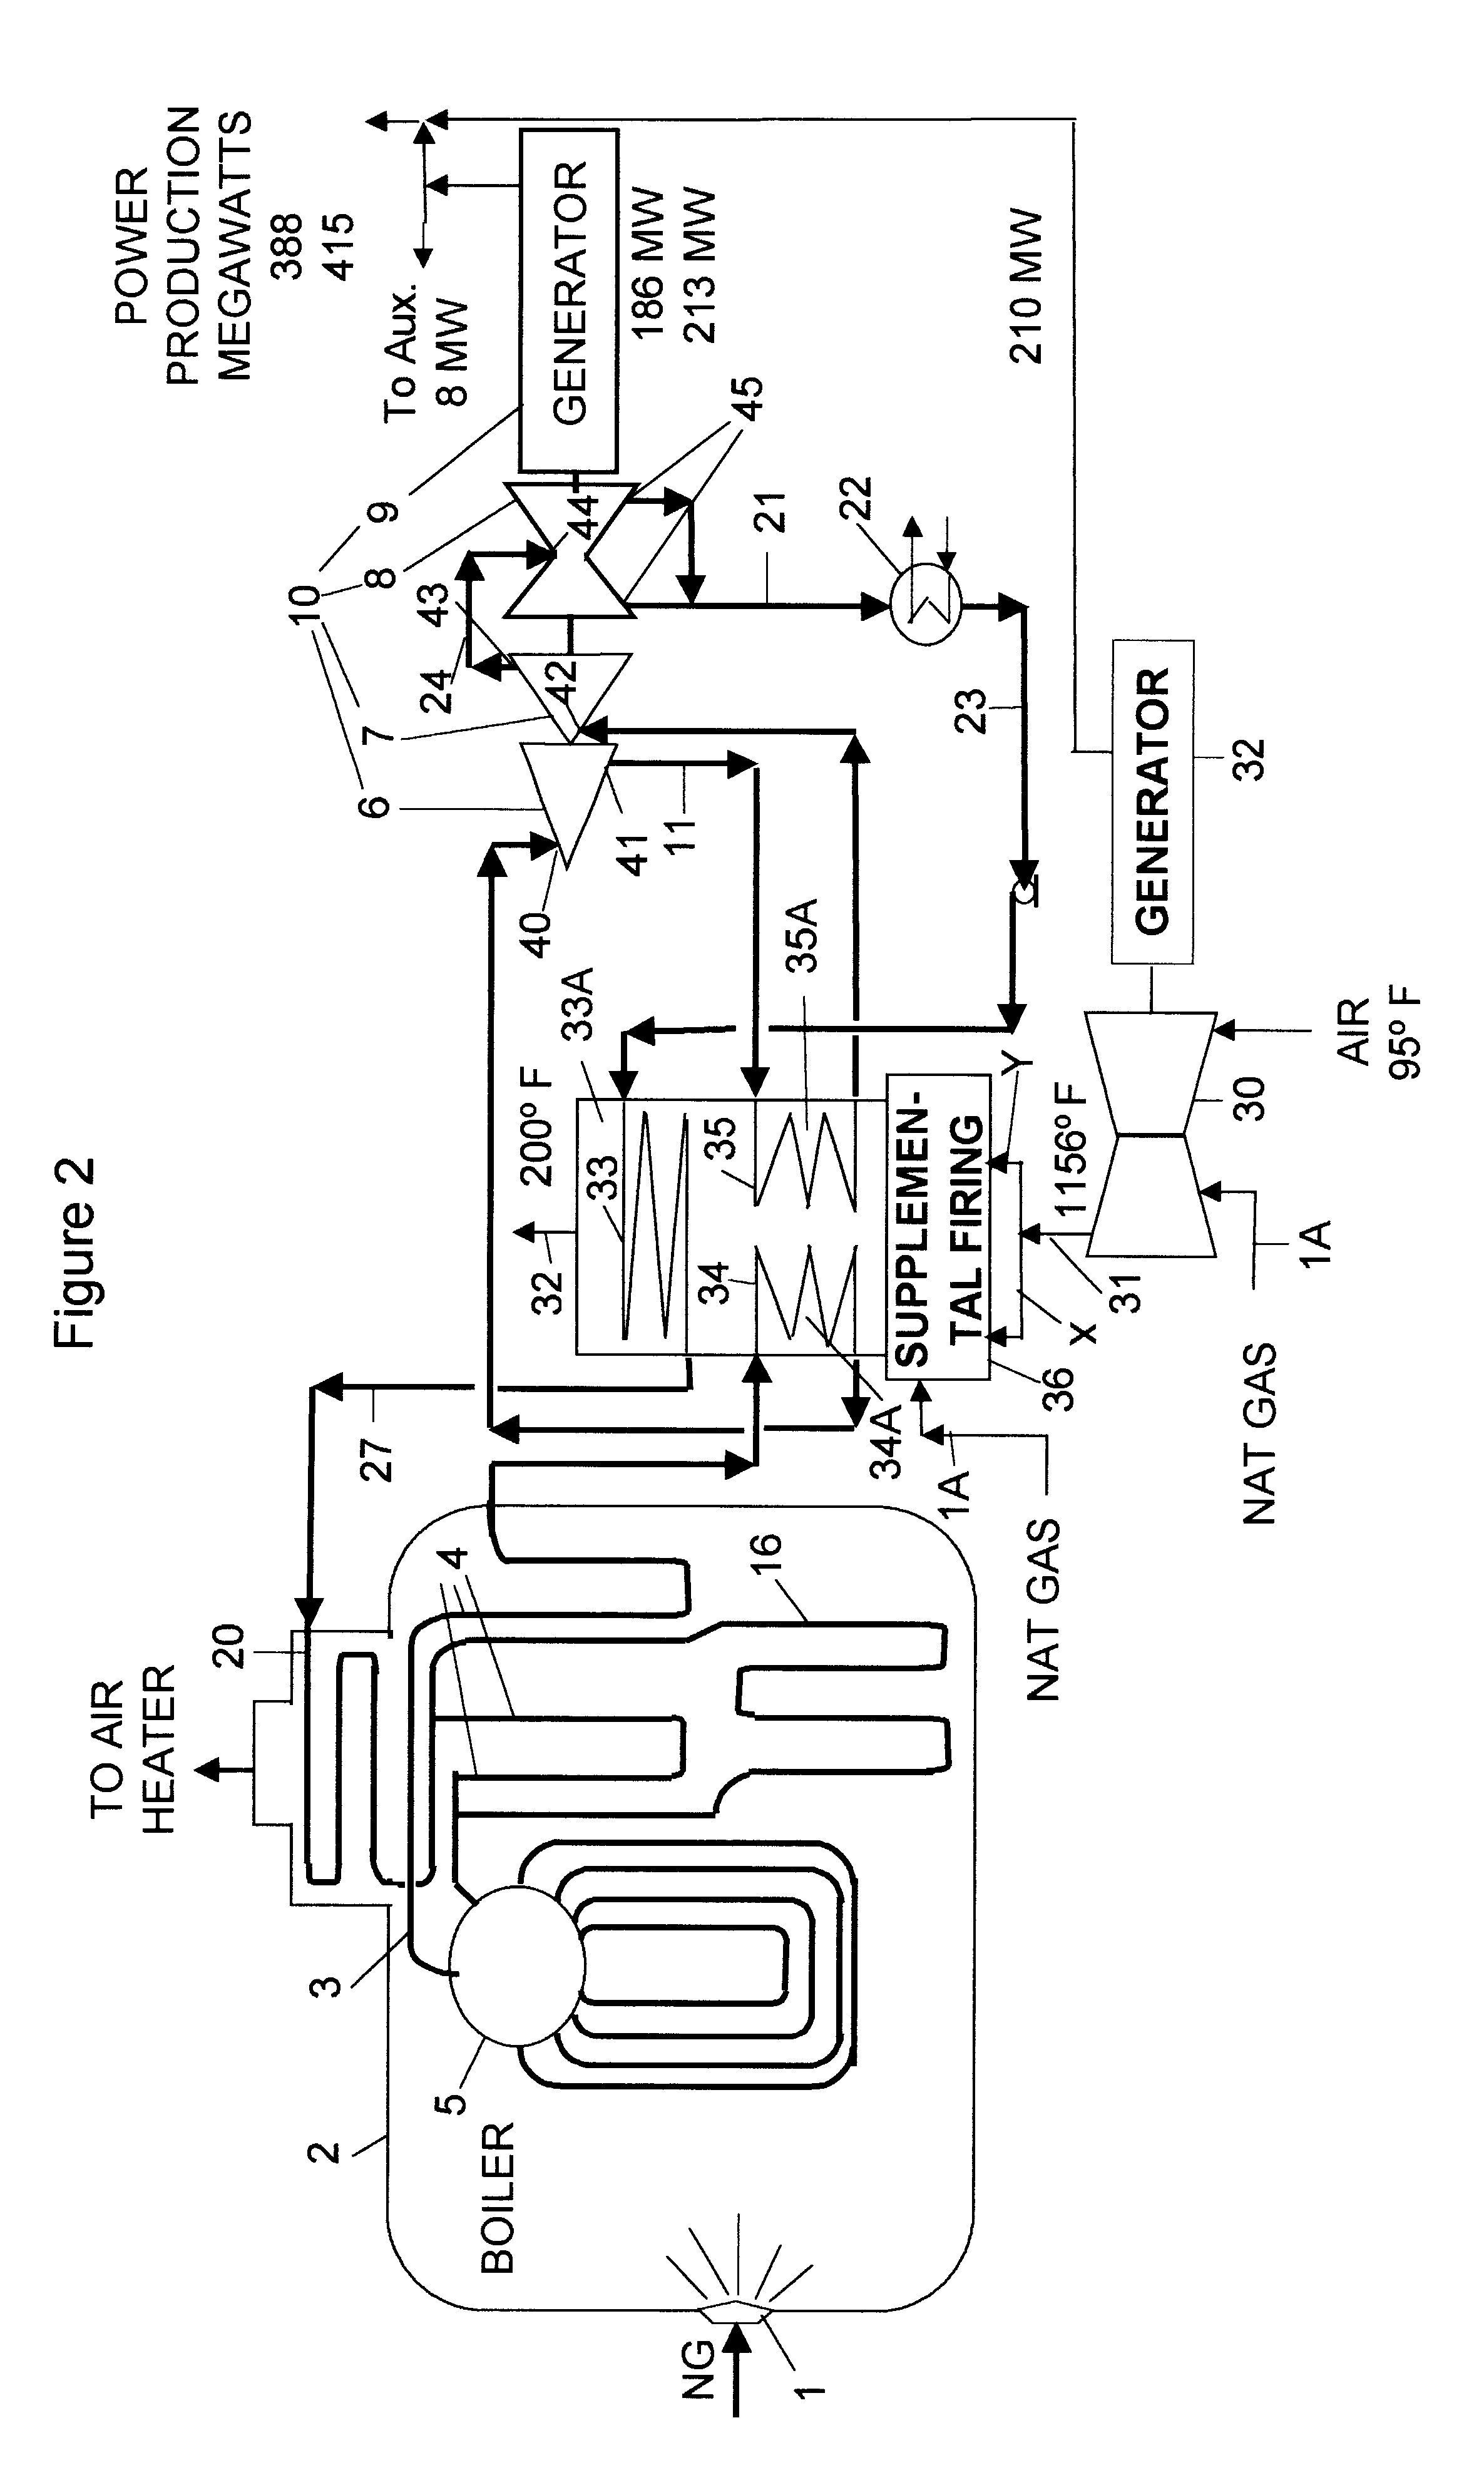 Process for generating electric power